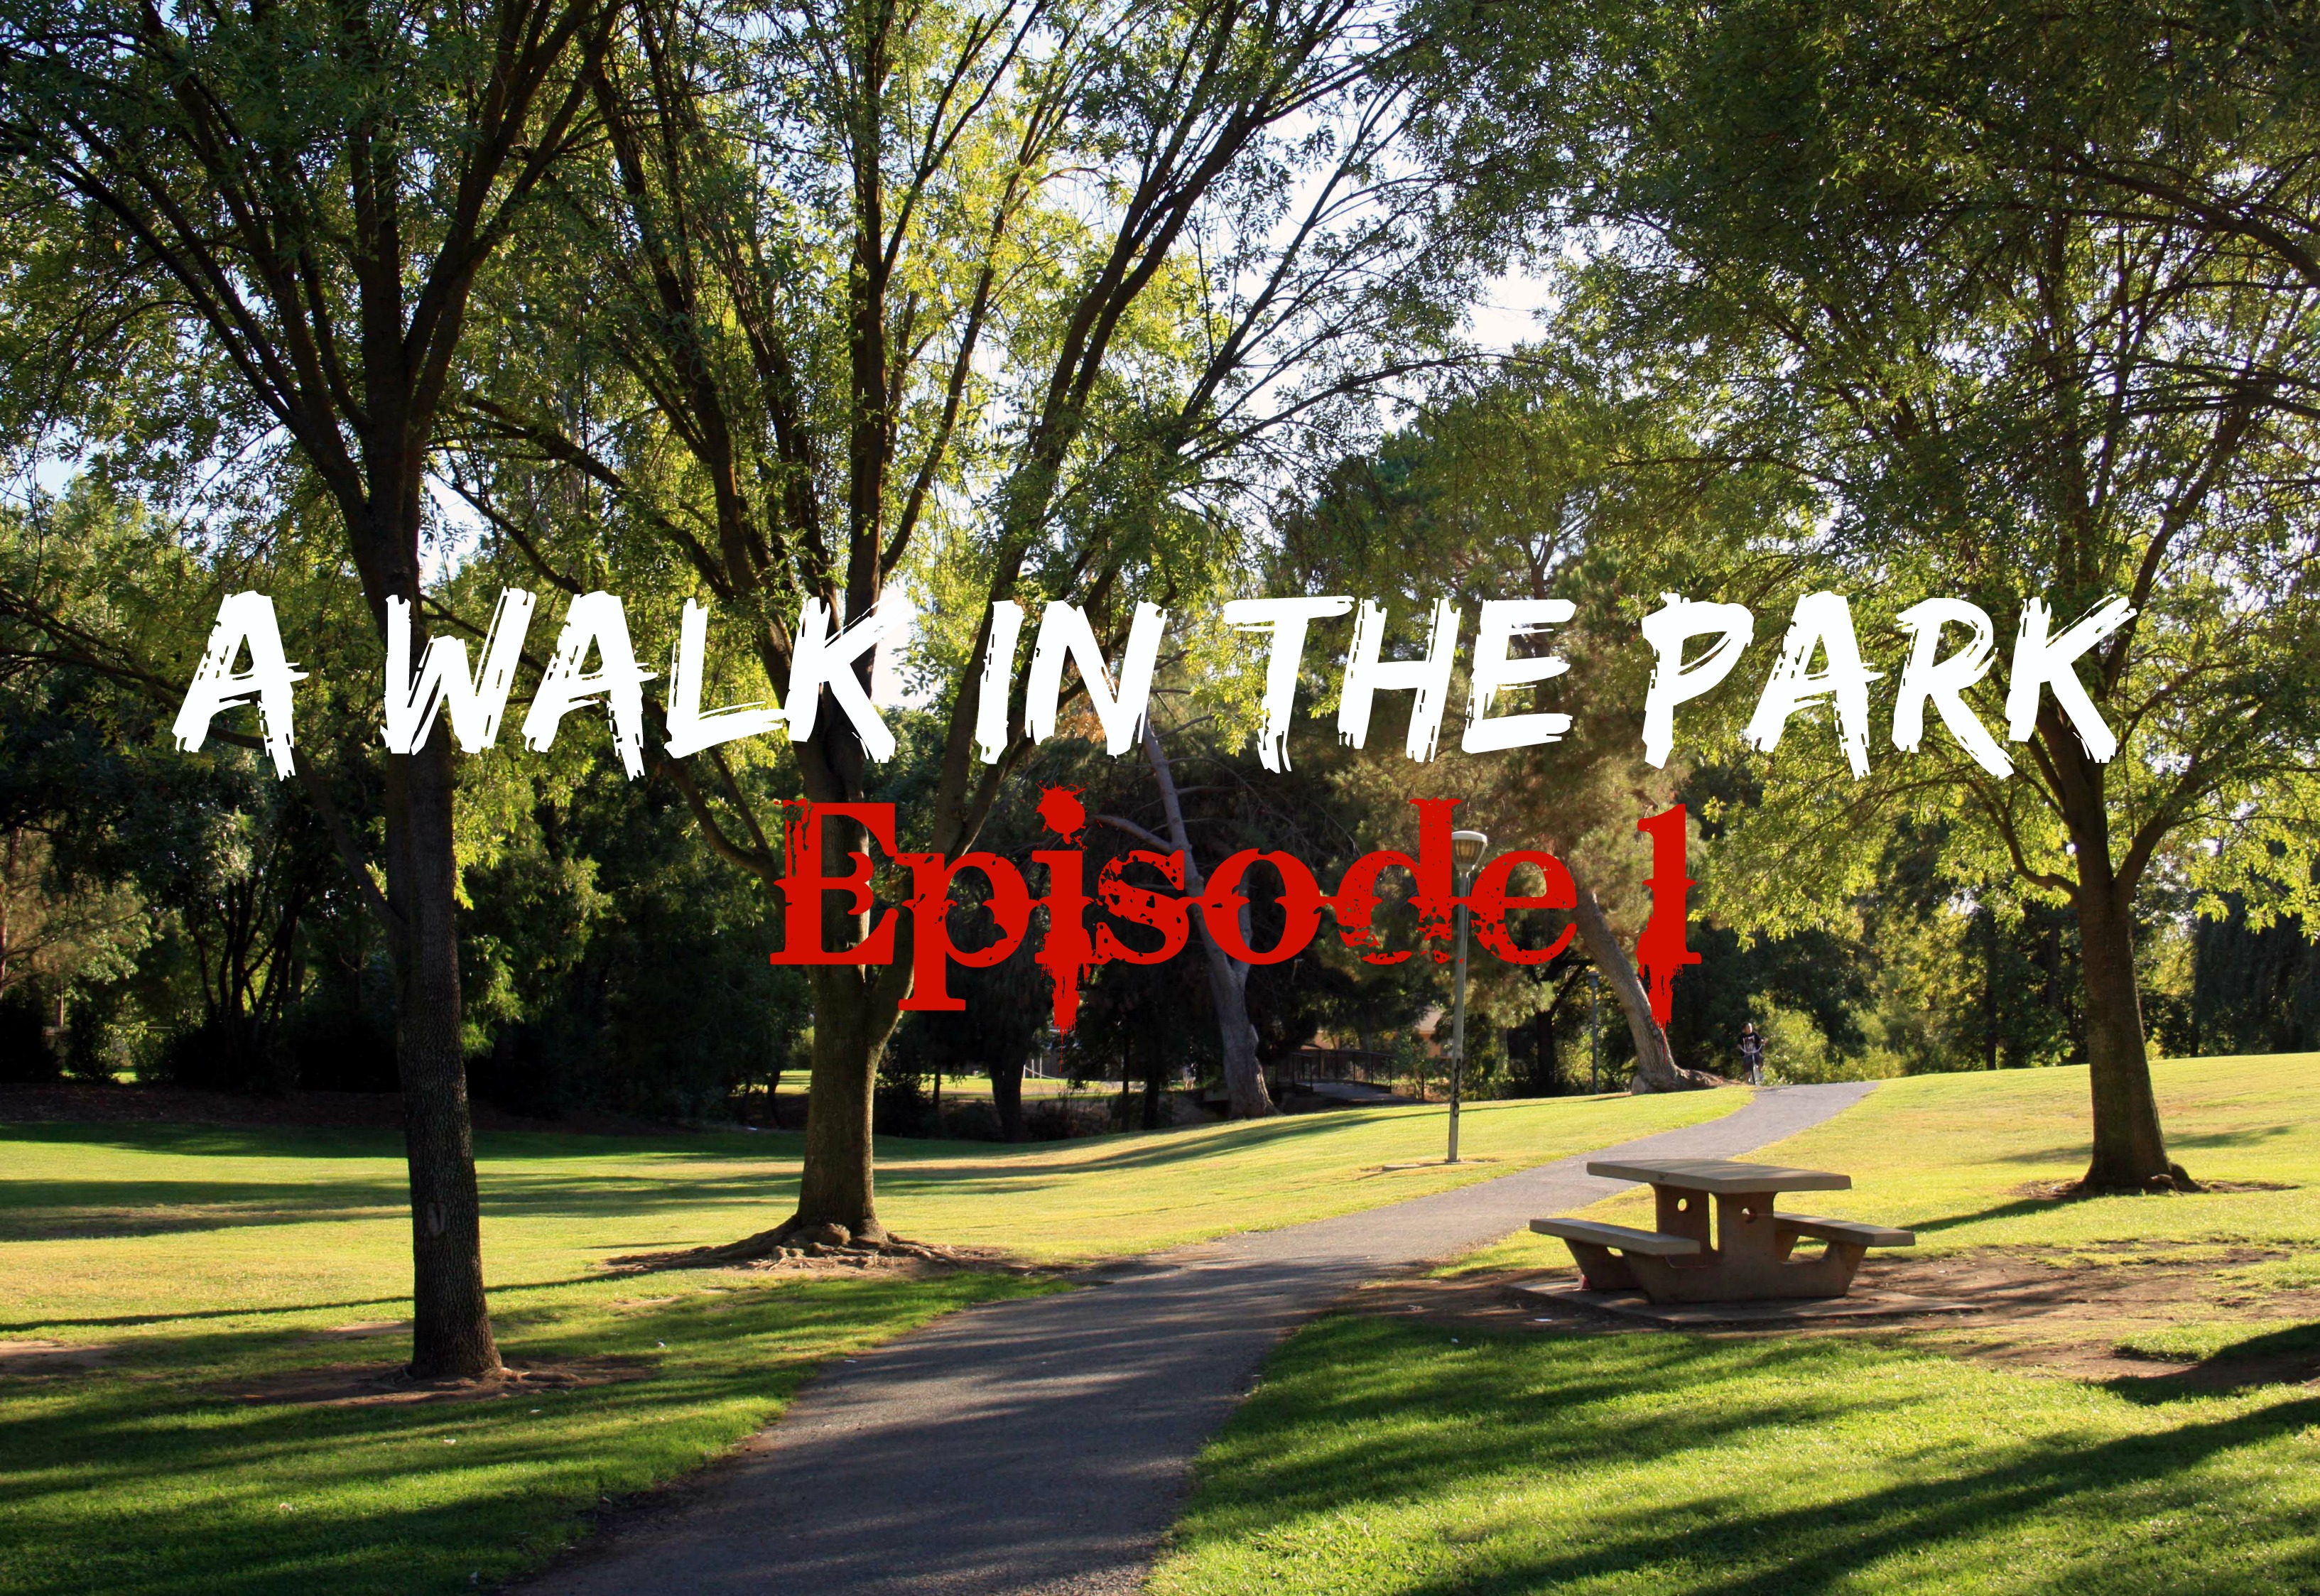 A walk in the park essay